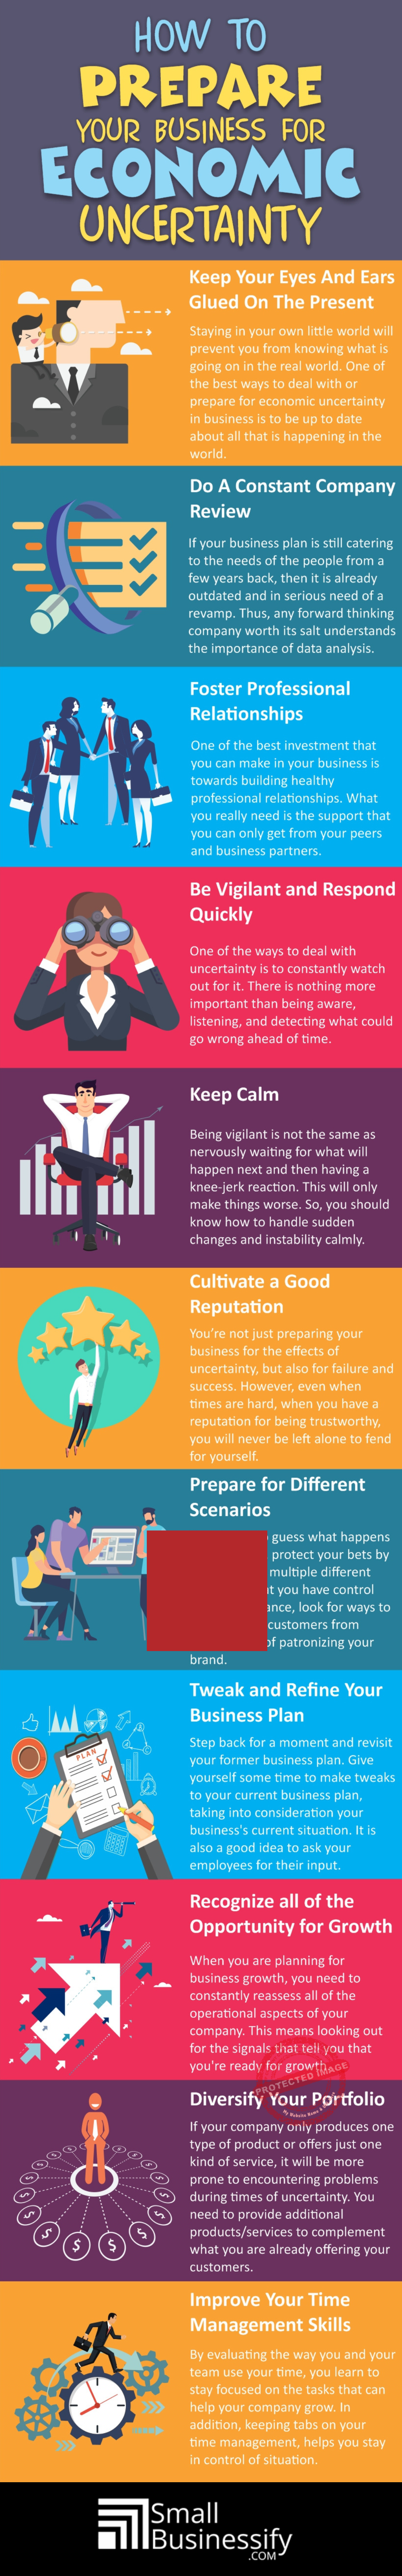 How To Prepare Your Business For Economic Uncertainty Infographic